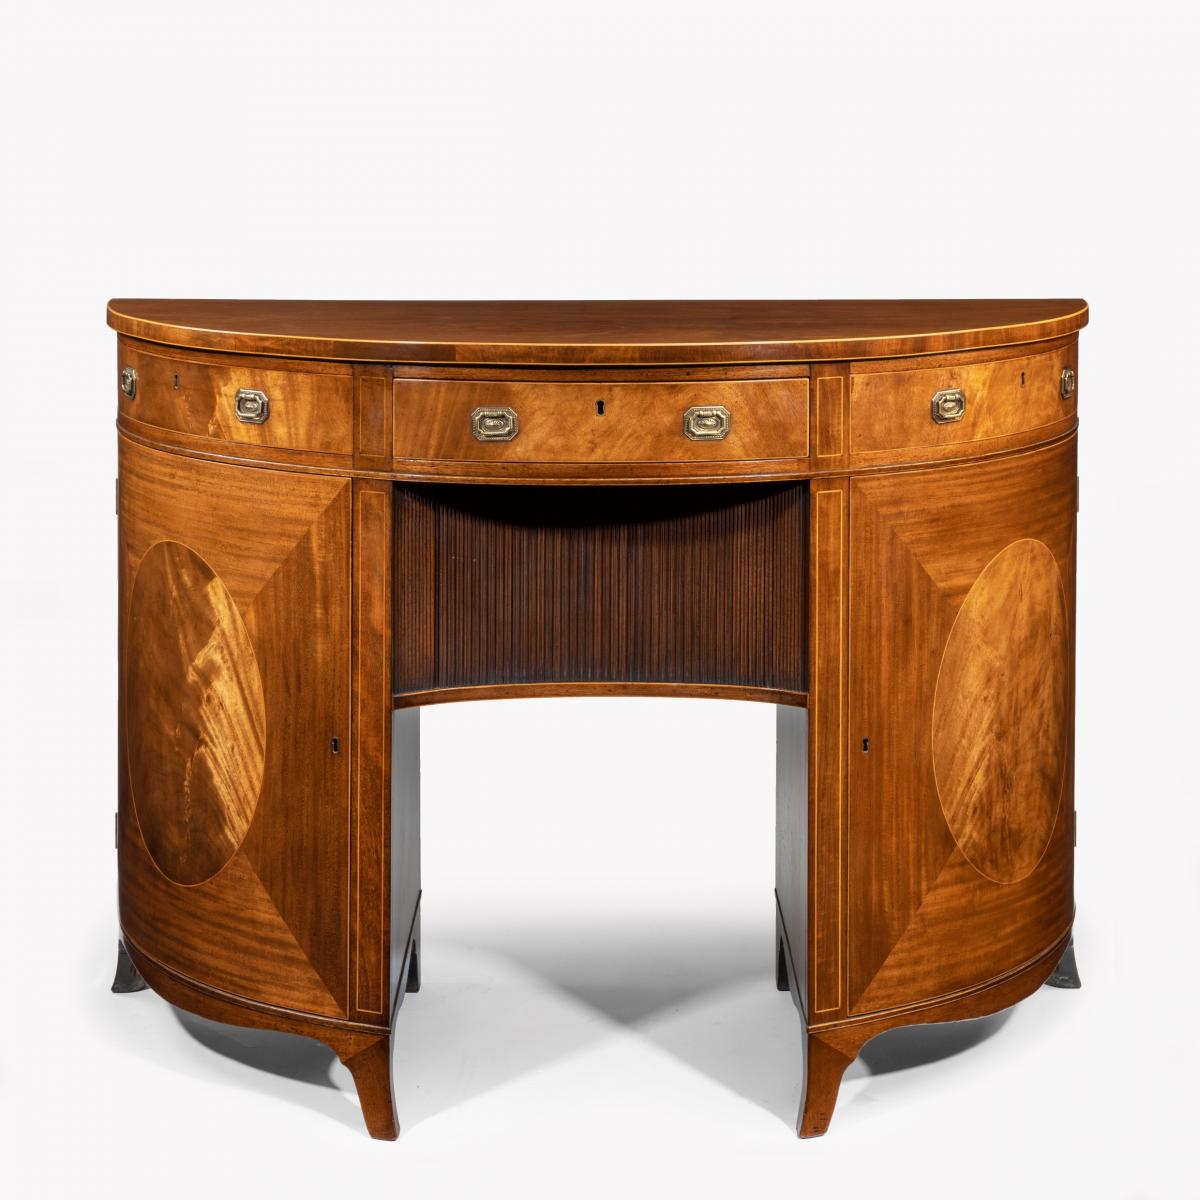 A fine pair of George III figured mahogany side cabinets, in the manner of Thomas Sheraton